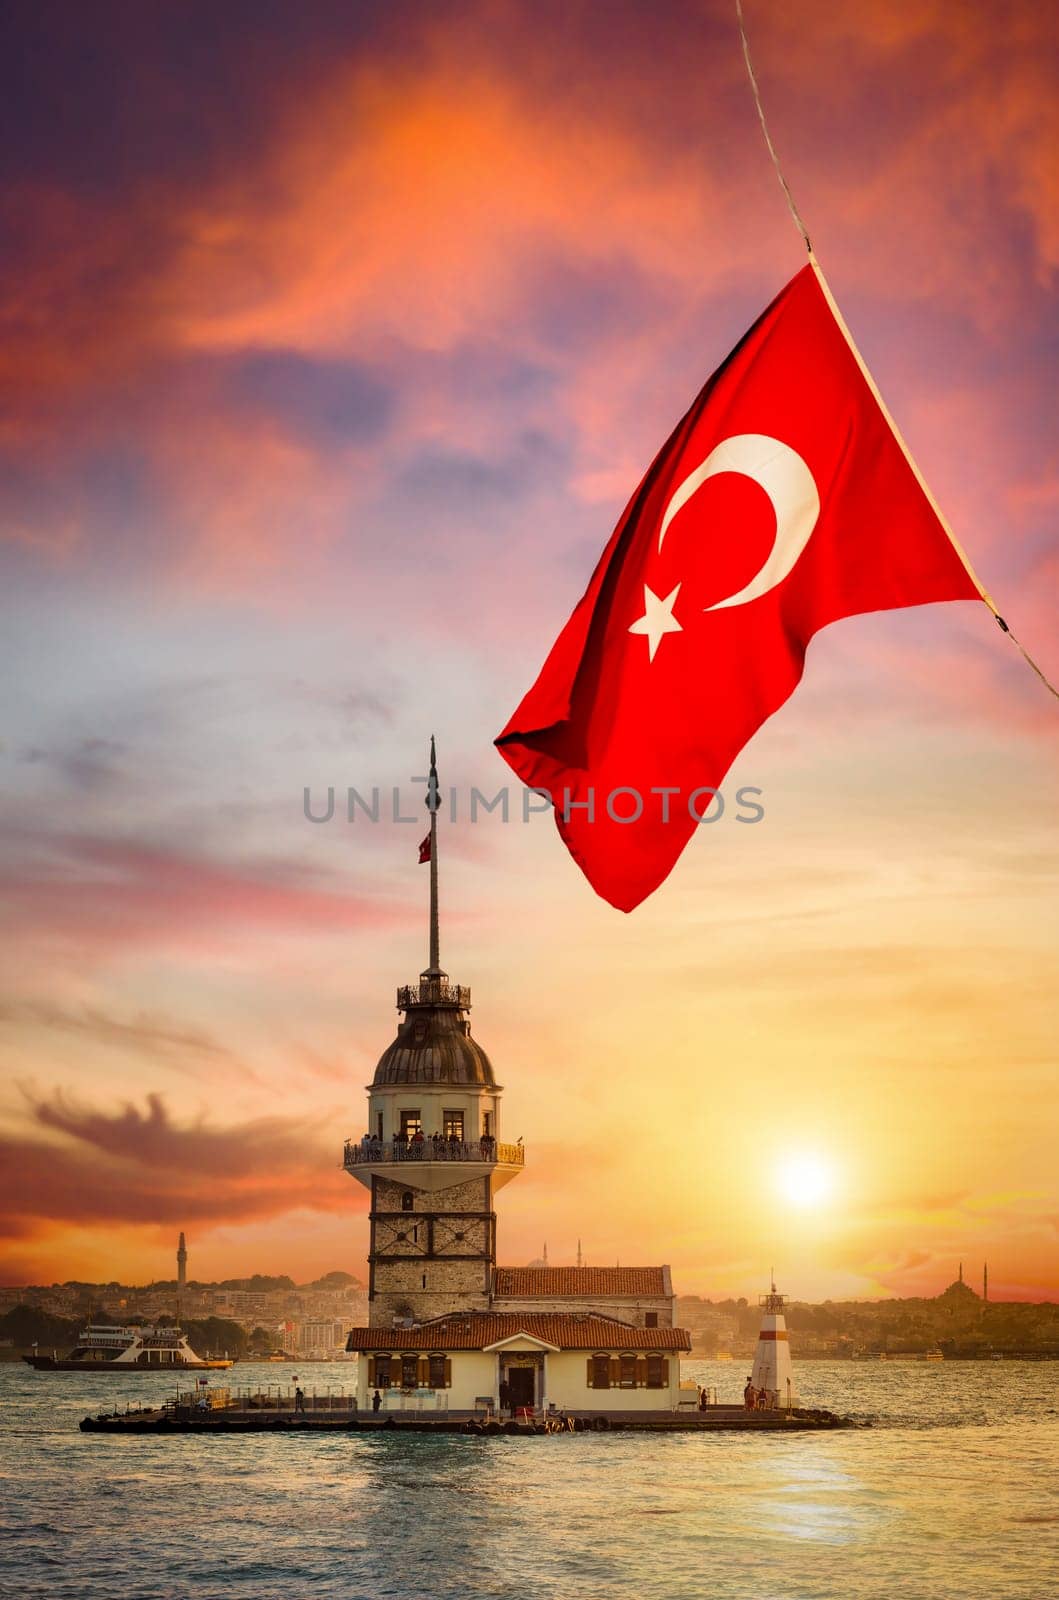 Turkish flag over tower by Givaga